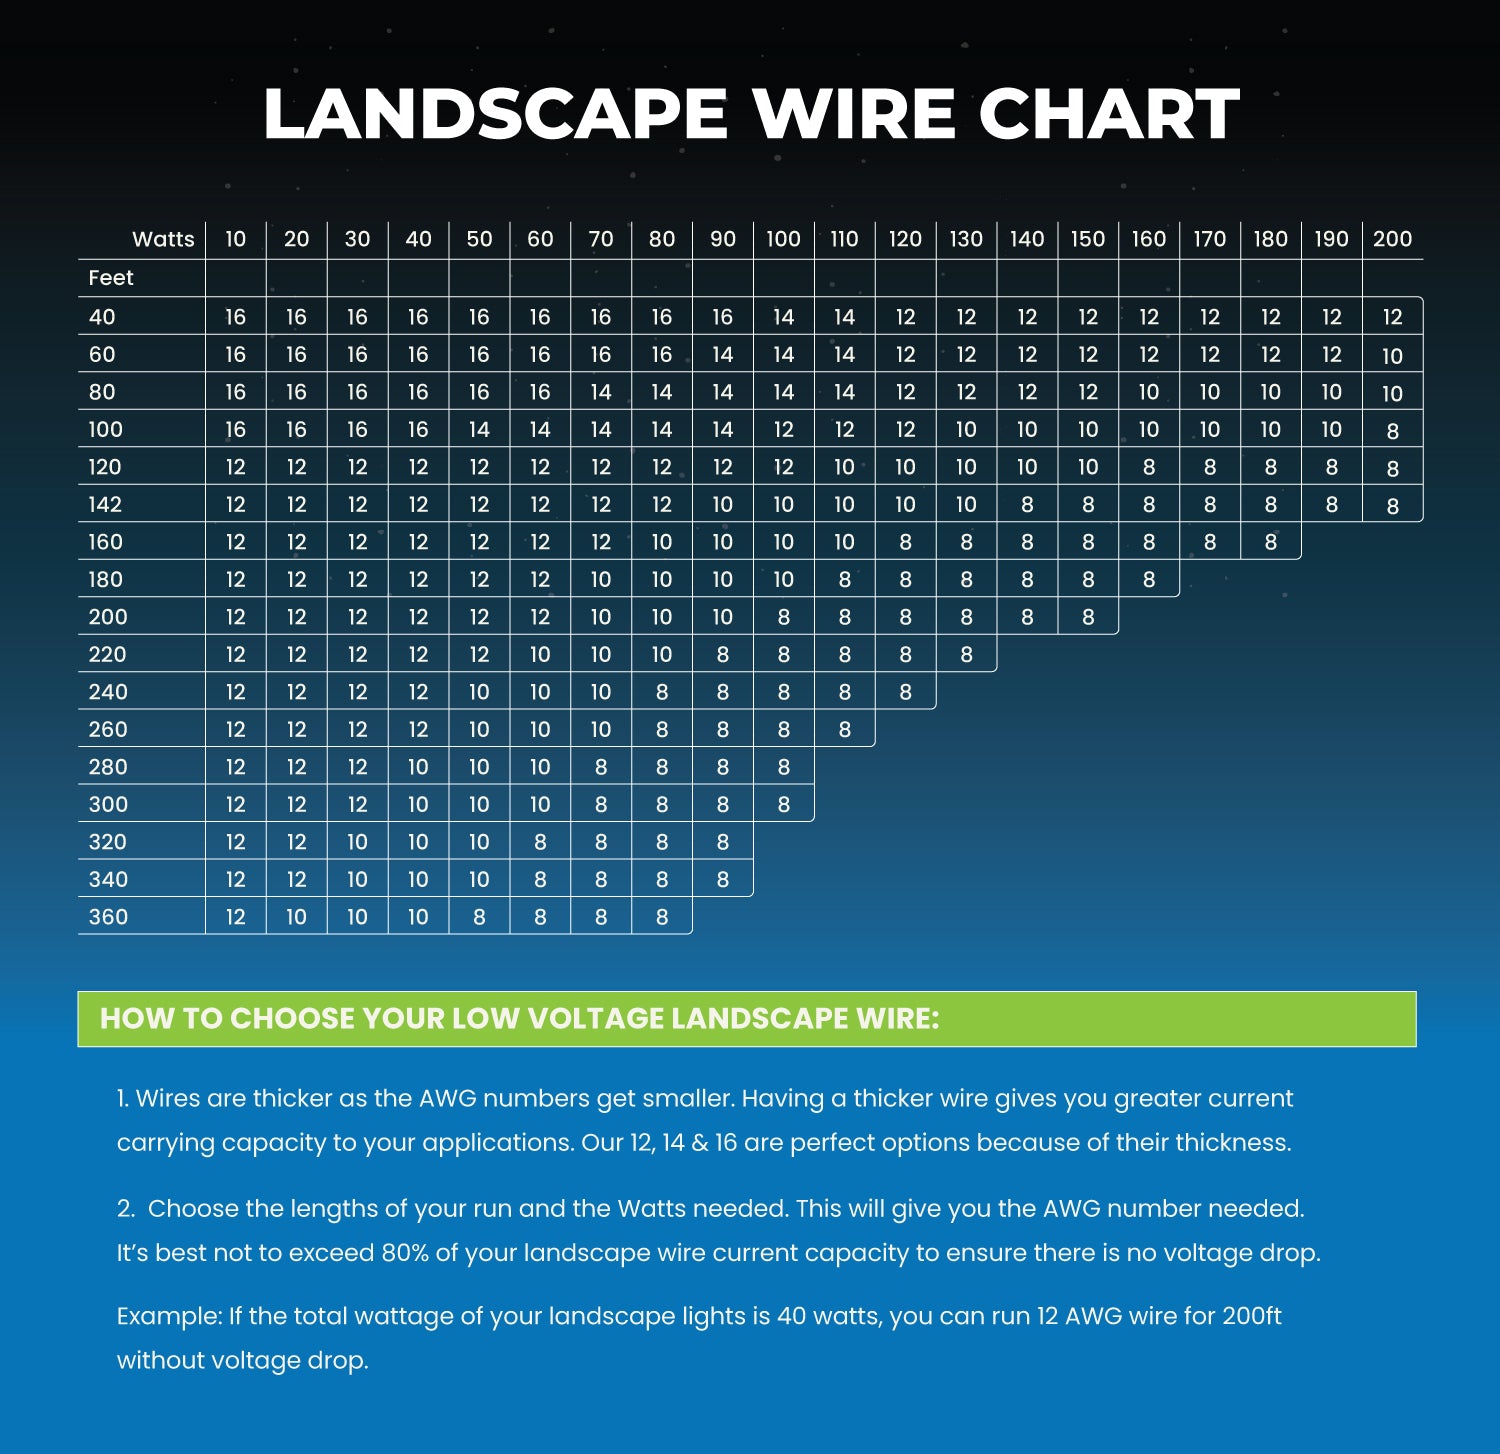 Low Voltage Wire vs Regular Wire: What's the Difference?